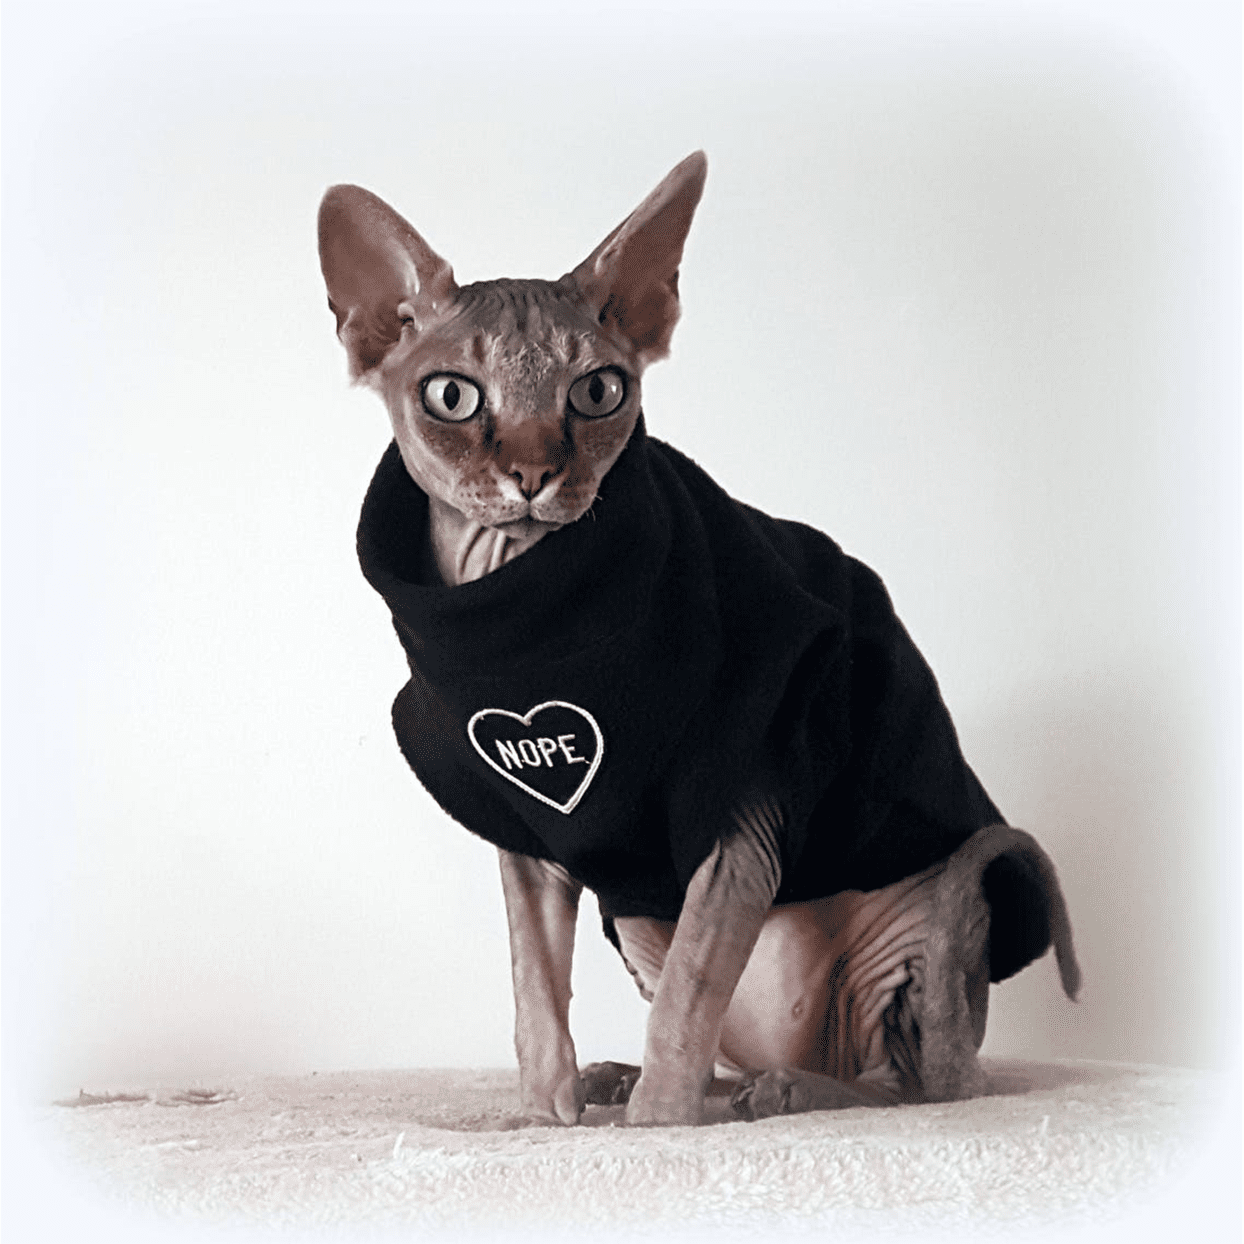 Hotsphynx YOUR NAME personalised cat jumper for a Sphynx cat Sphynx cat clothes